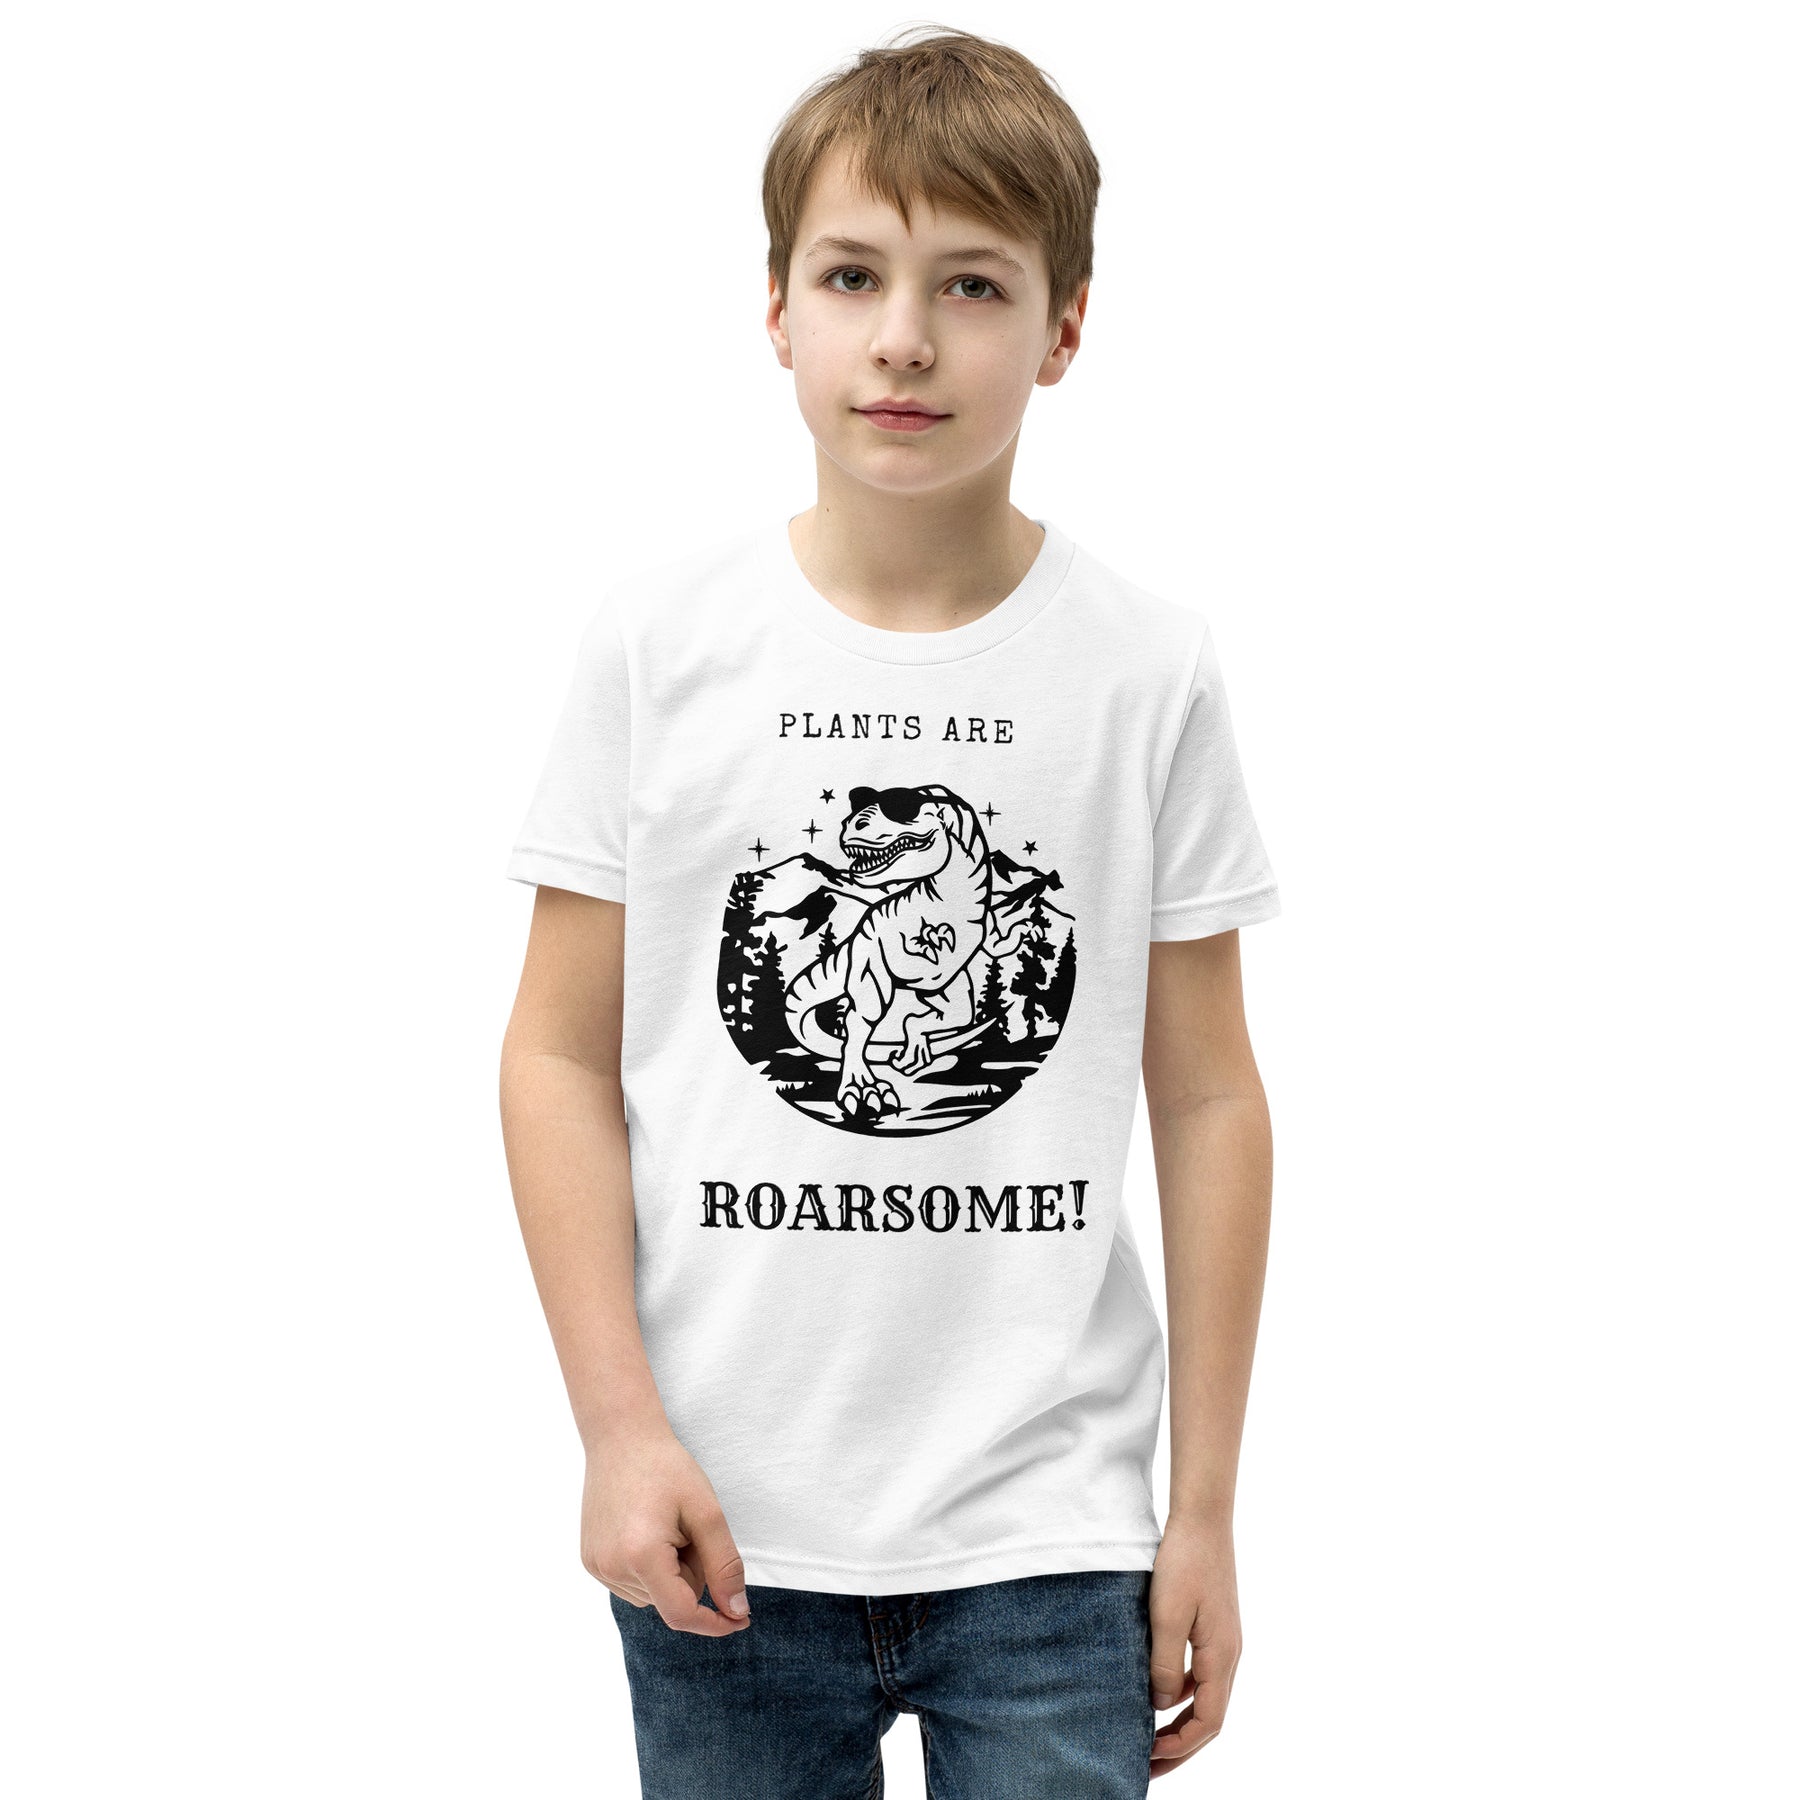 PLANTS ARE ROARSOME Youth Short Sleeve T-Shirt